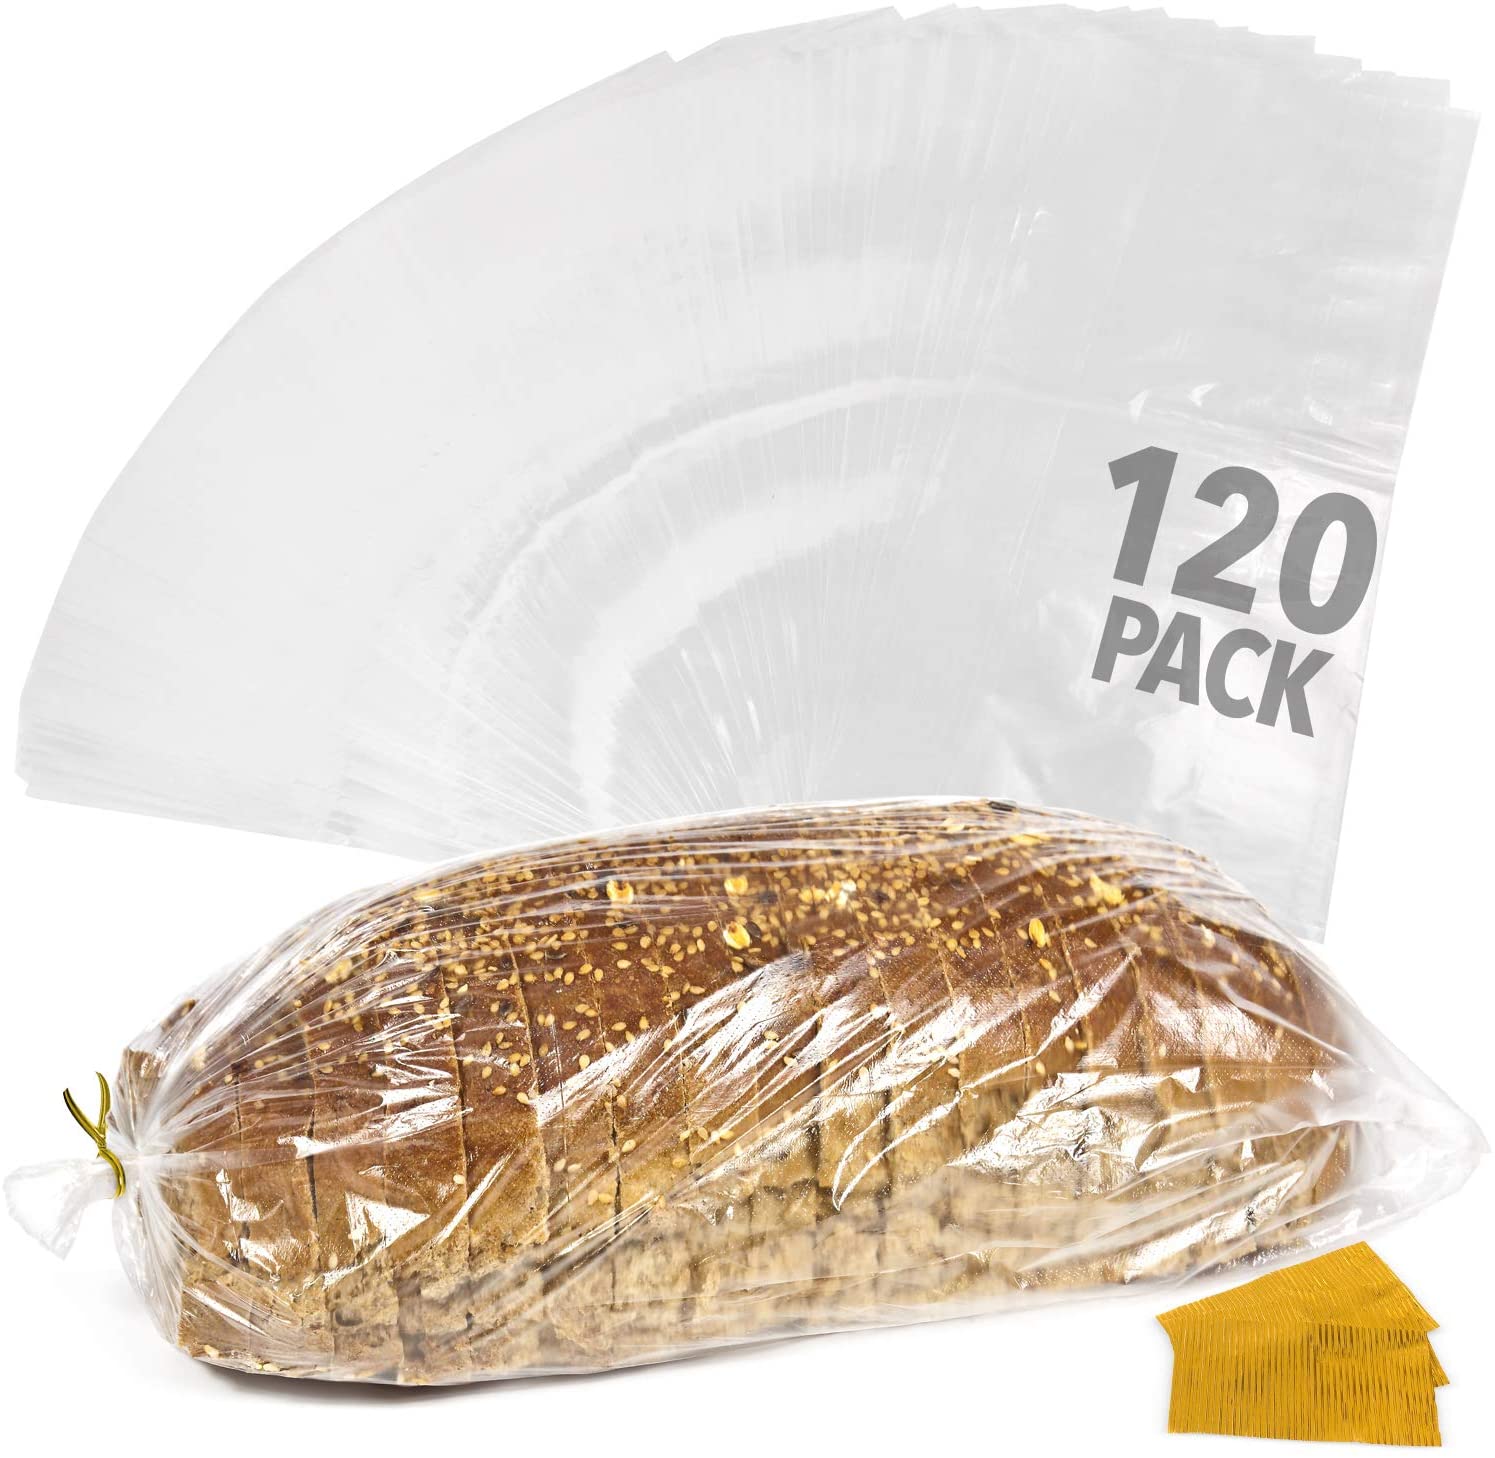  [120 Pack] 2lb Wild Game Bags for Freezer Storage